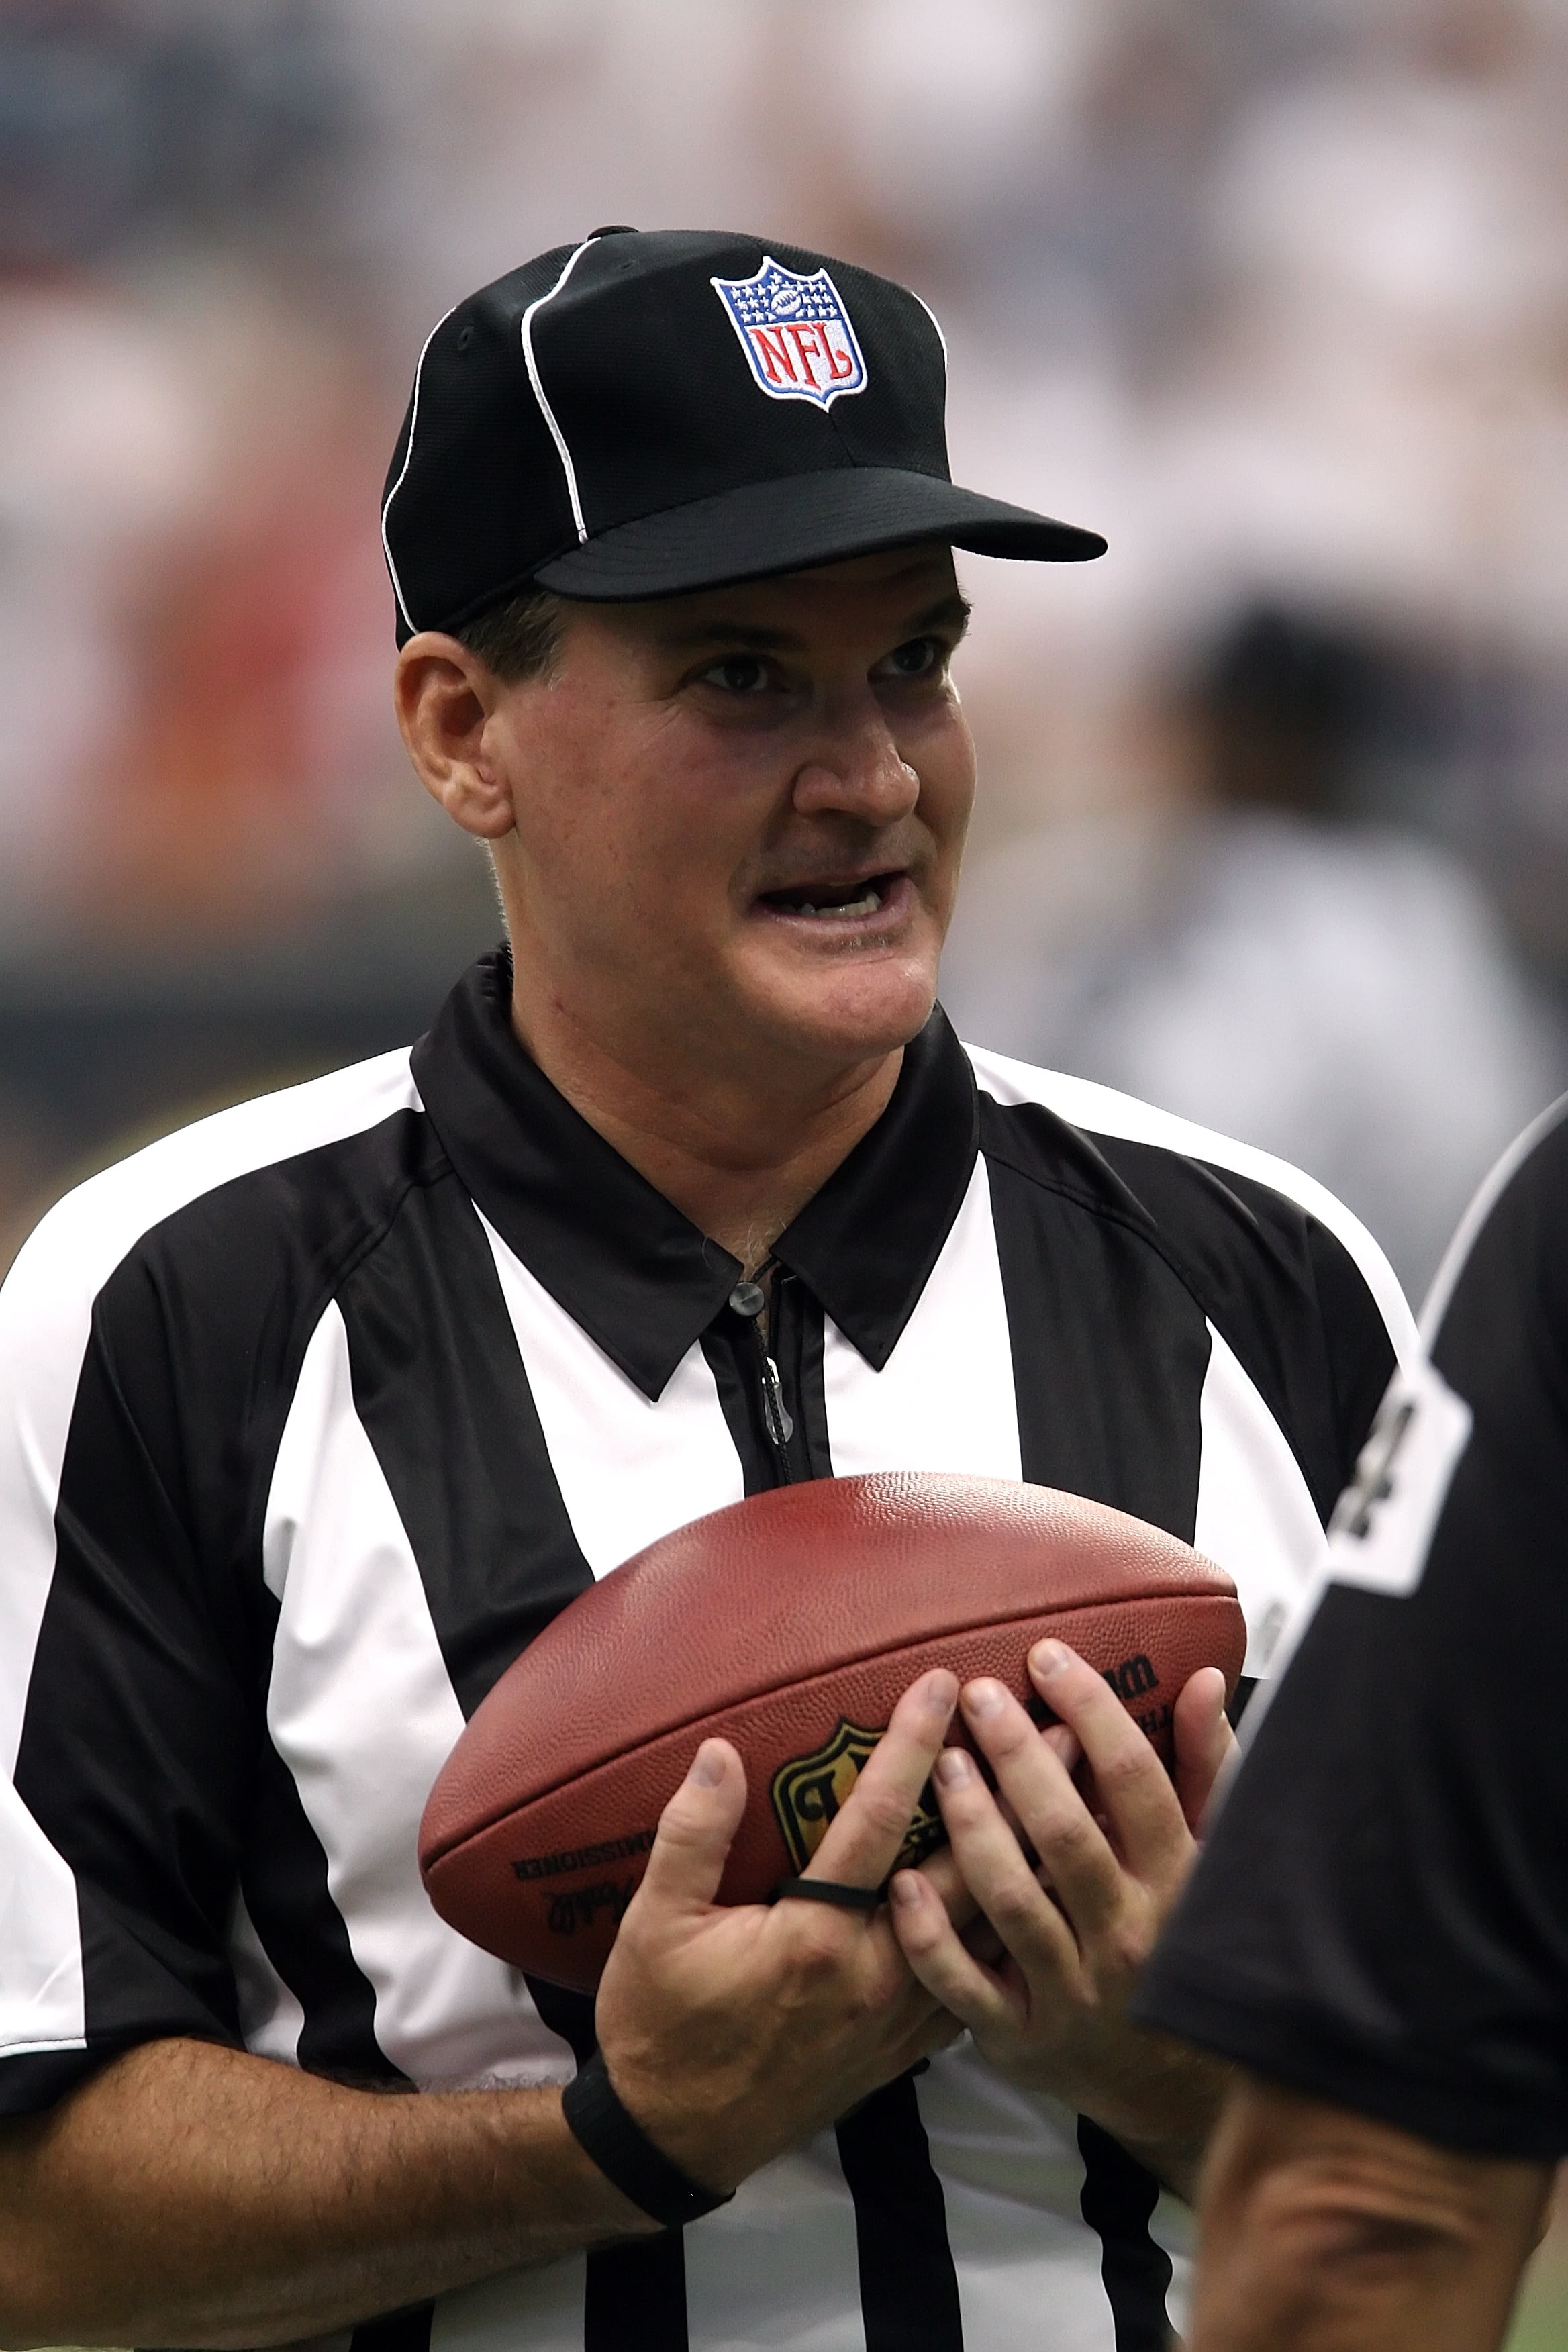 football referee, professional football, nfl, game, competition